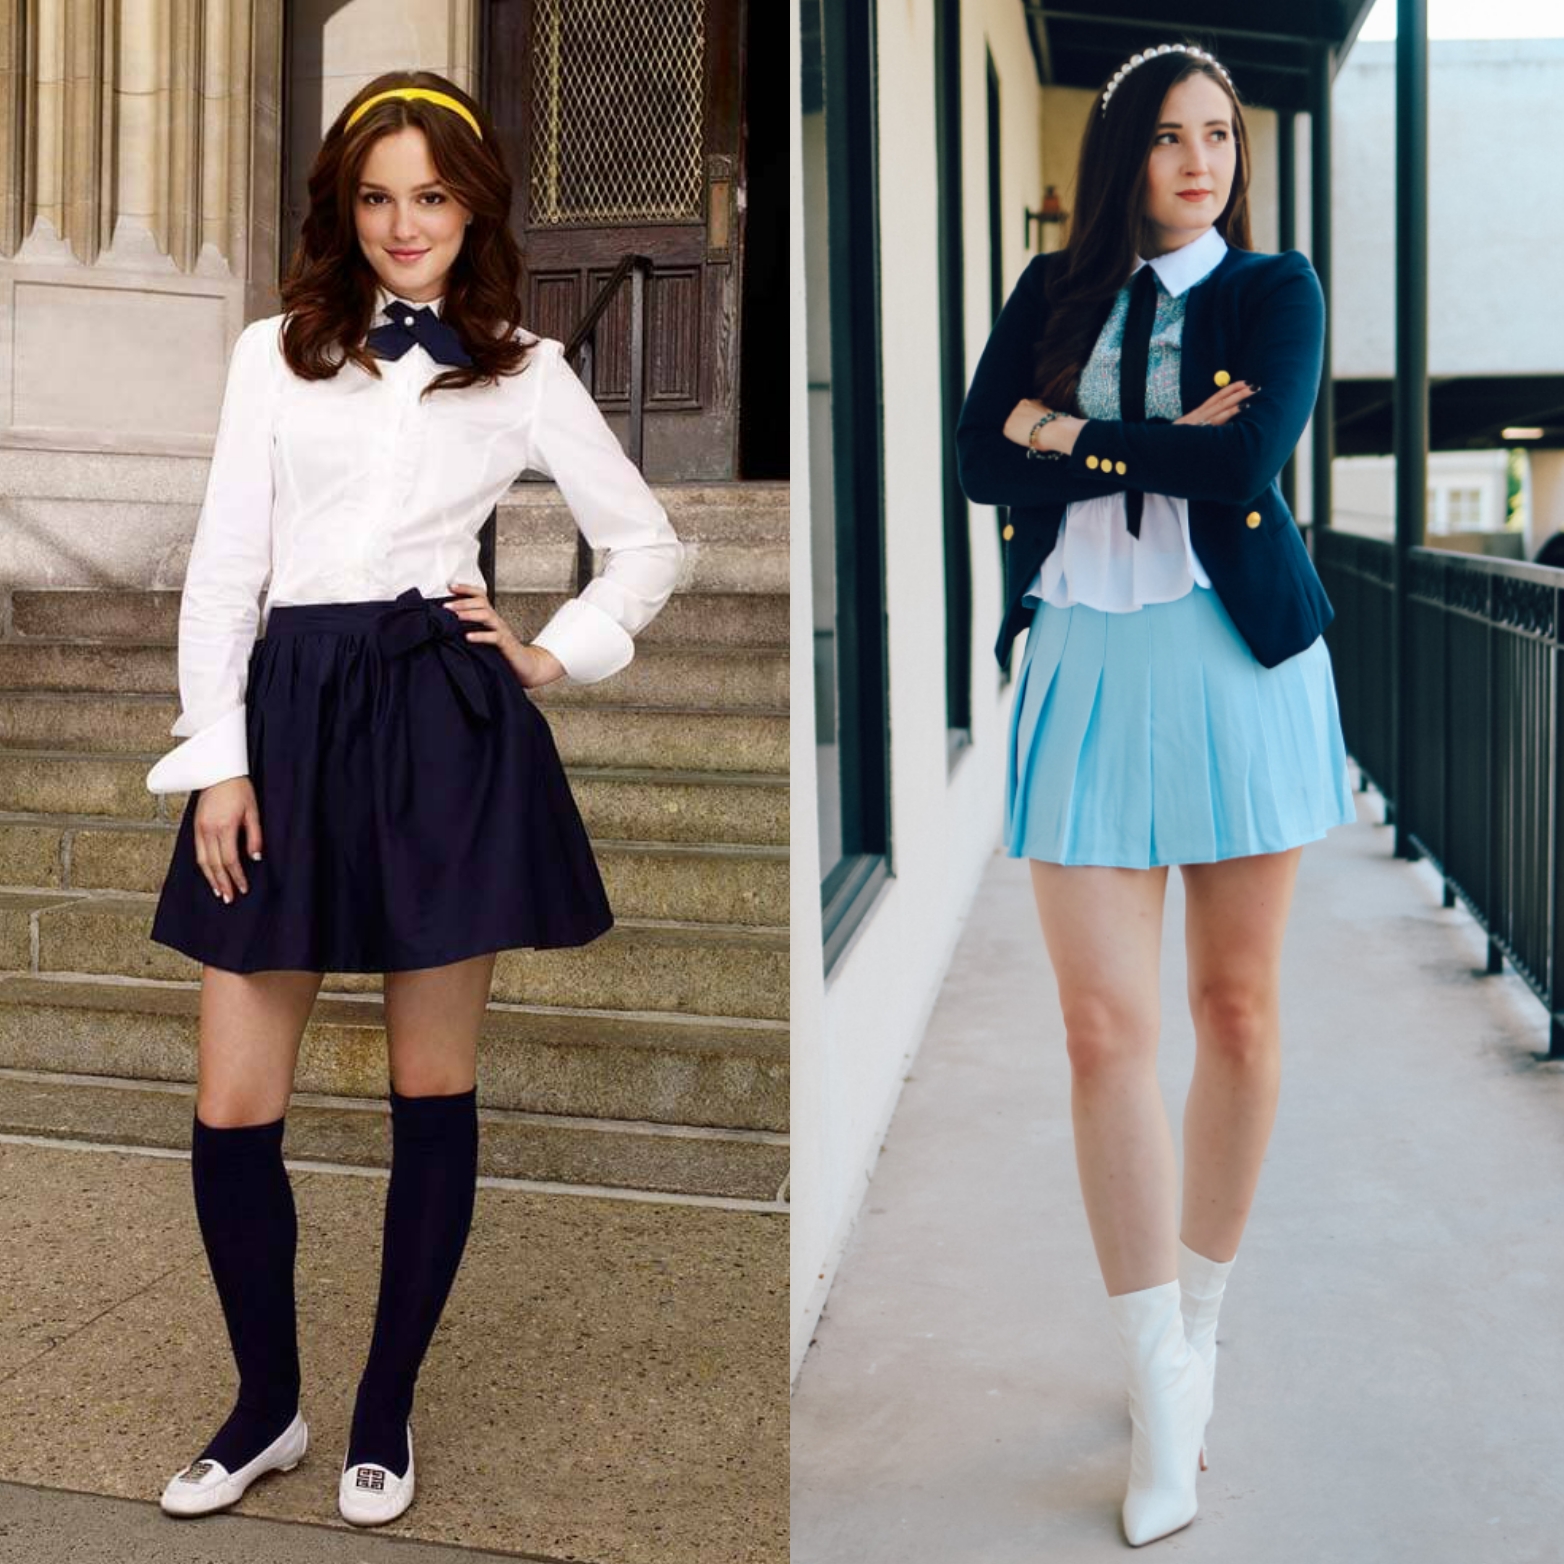 The New 'Gossip Girl' Outfits Are XOXO Good